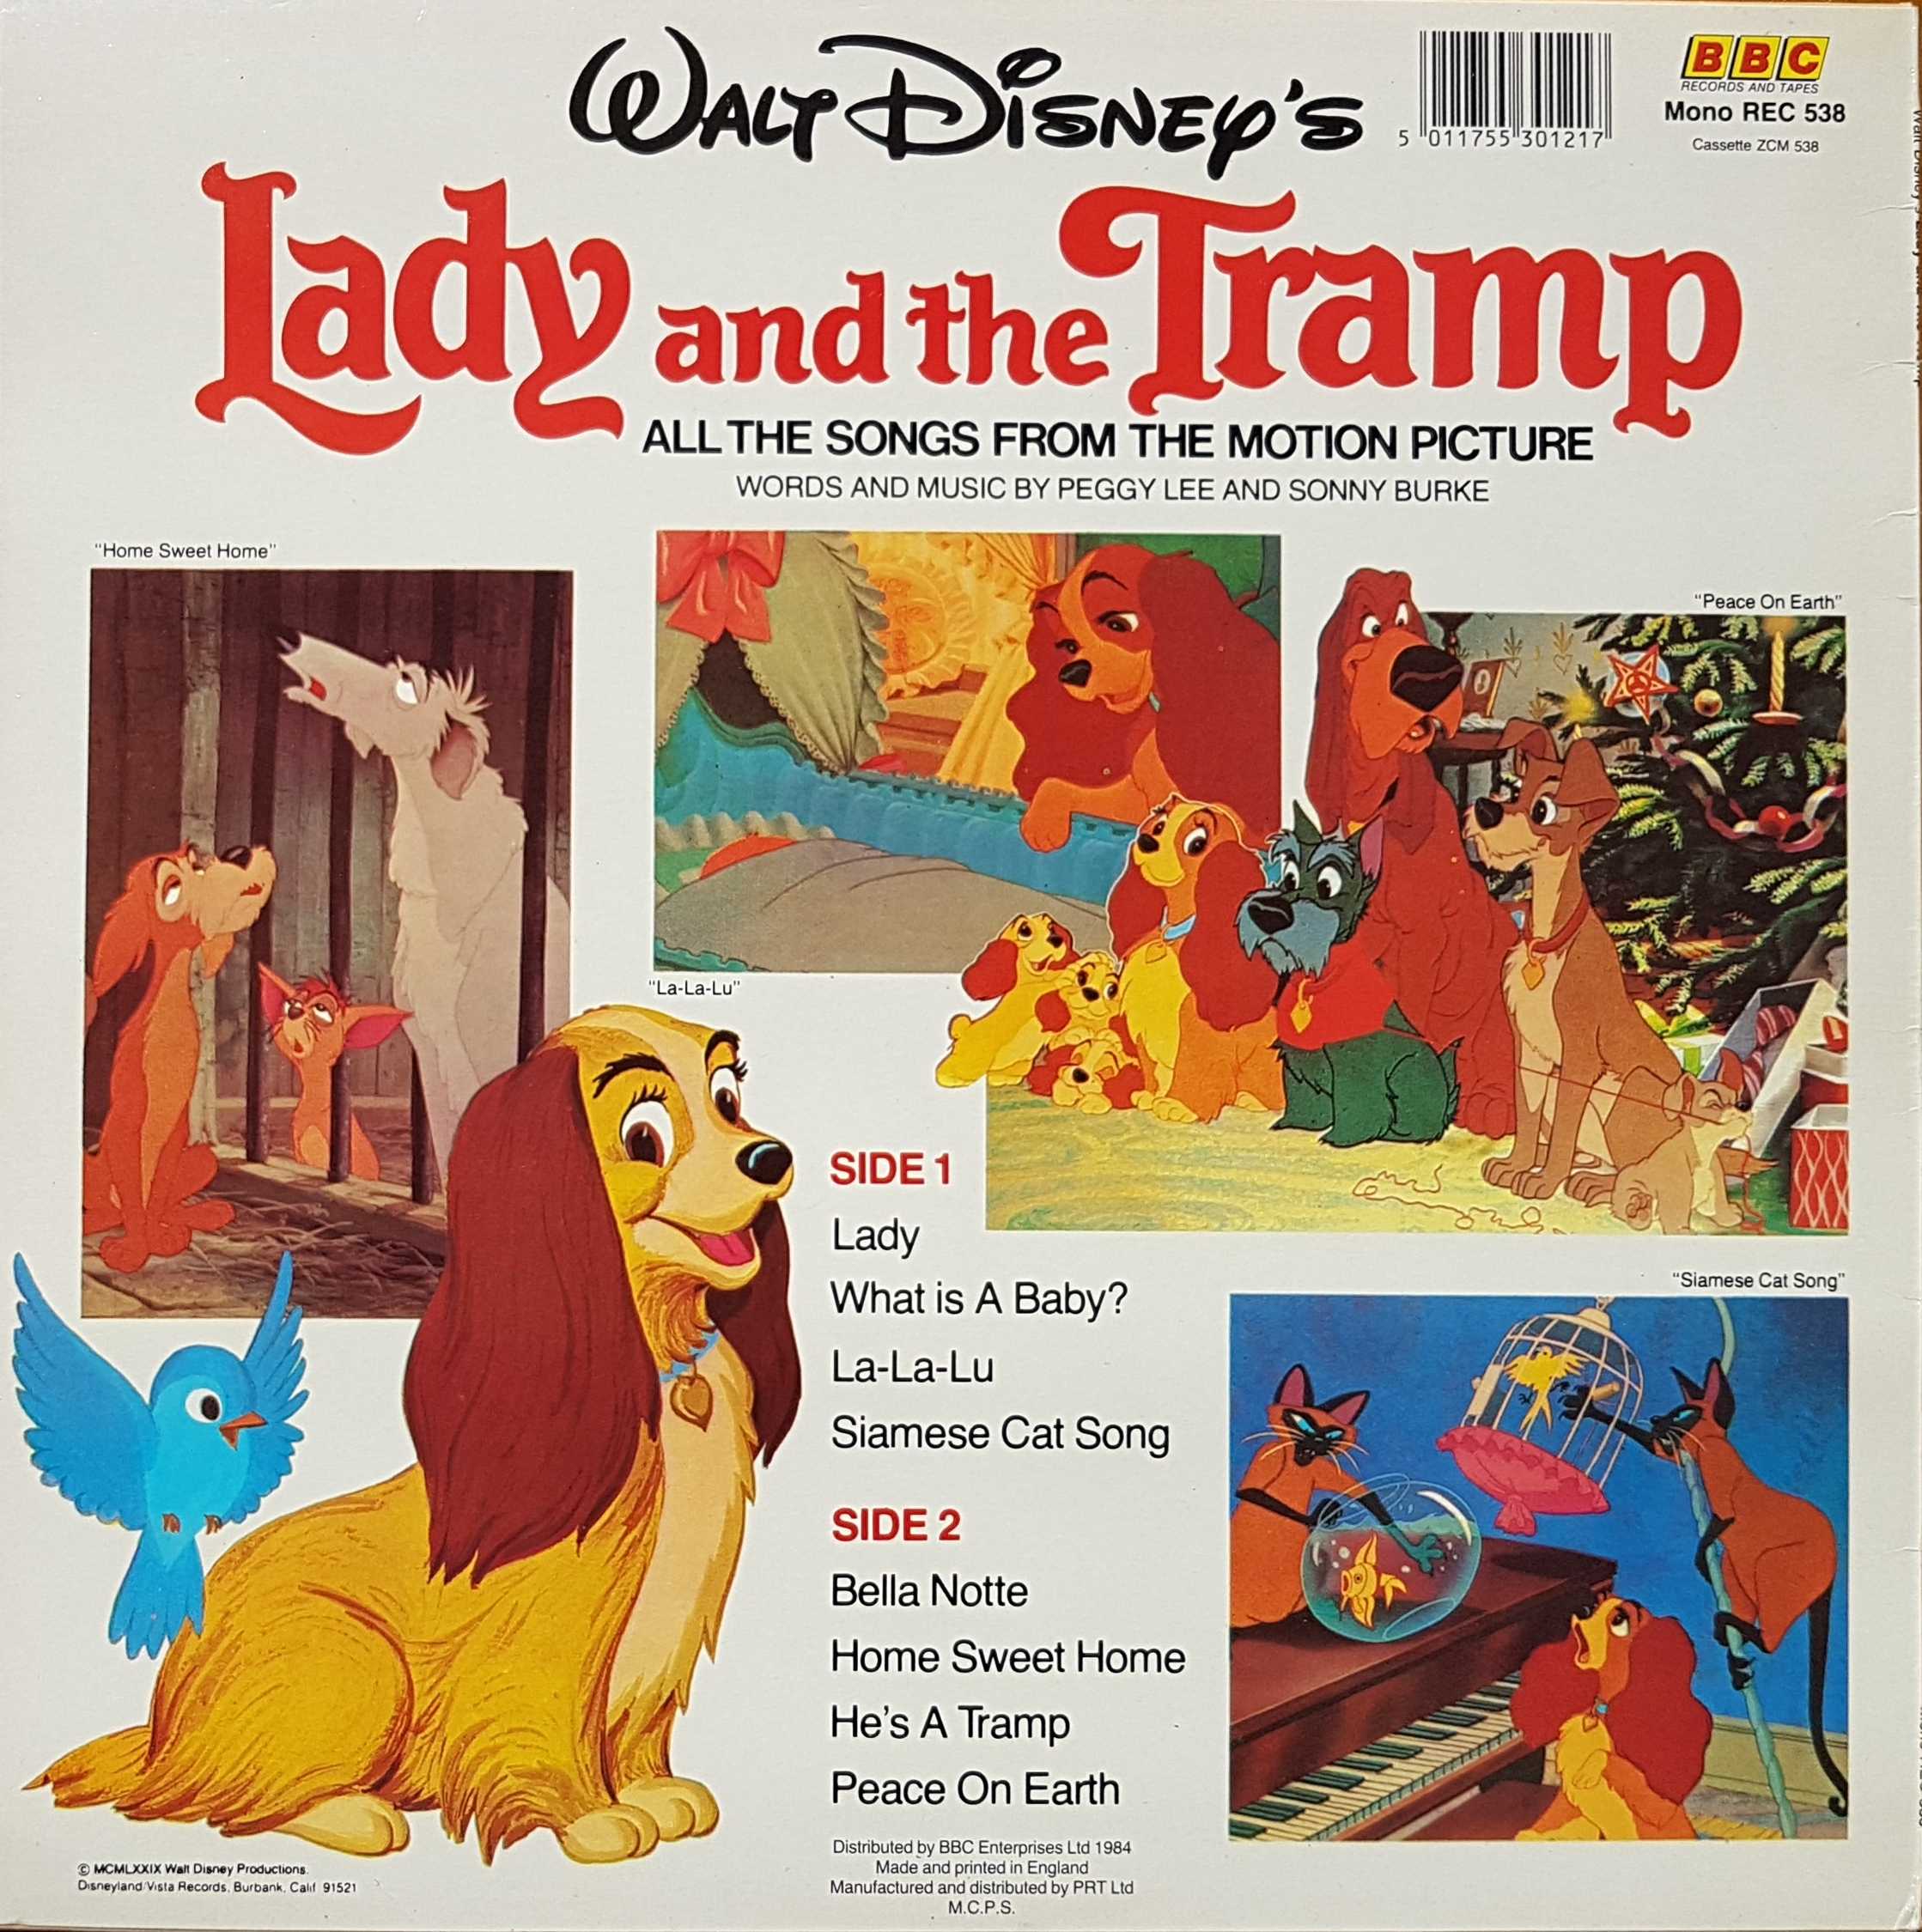 Picture of REC 538 Lady and the tramp by artist Peggy Lee / Sonny Burke from the BBC records and Tapes library